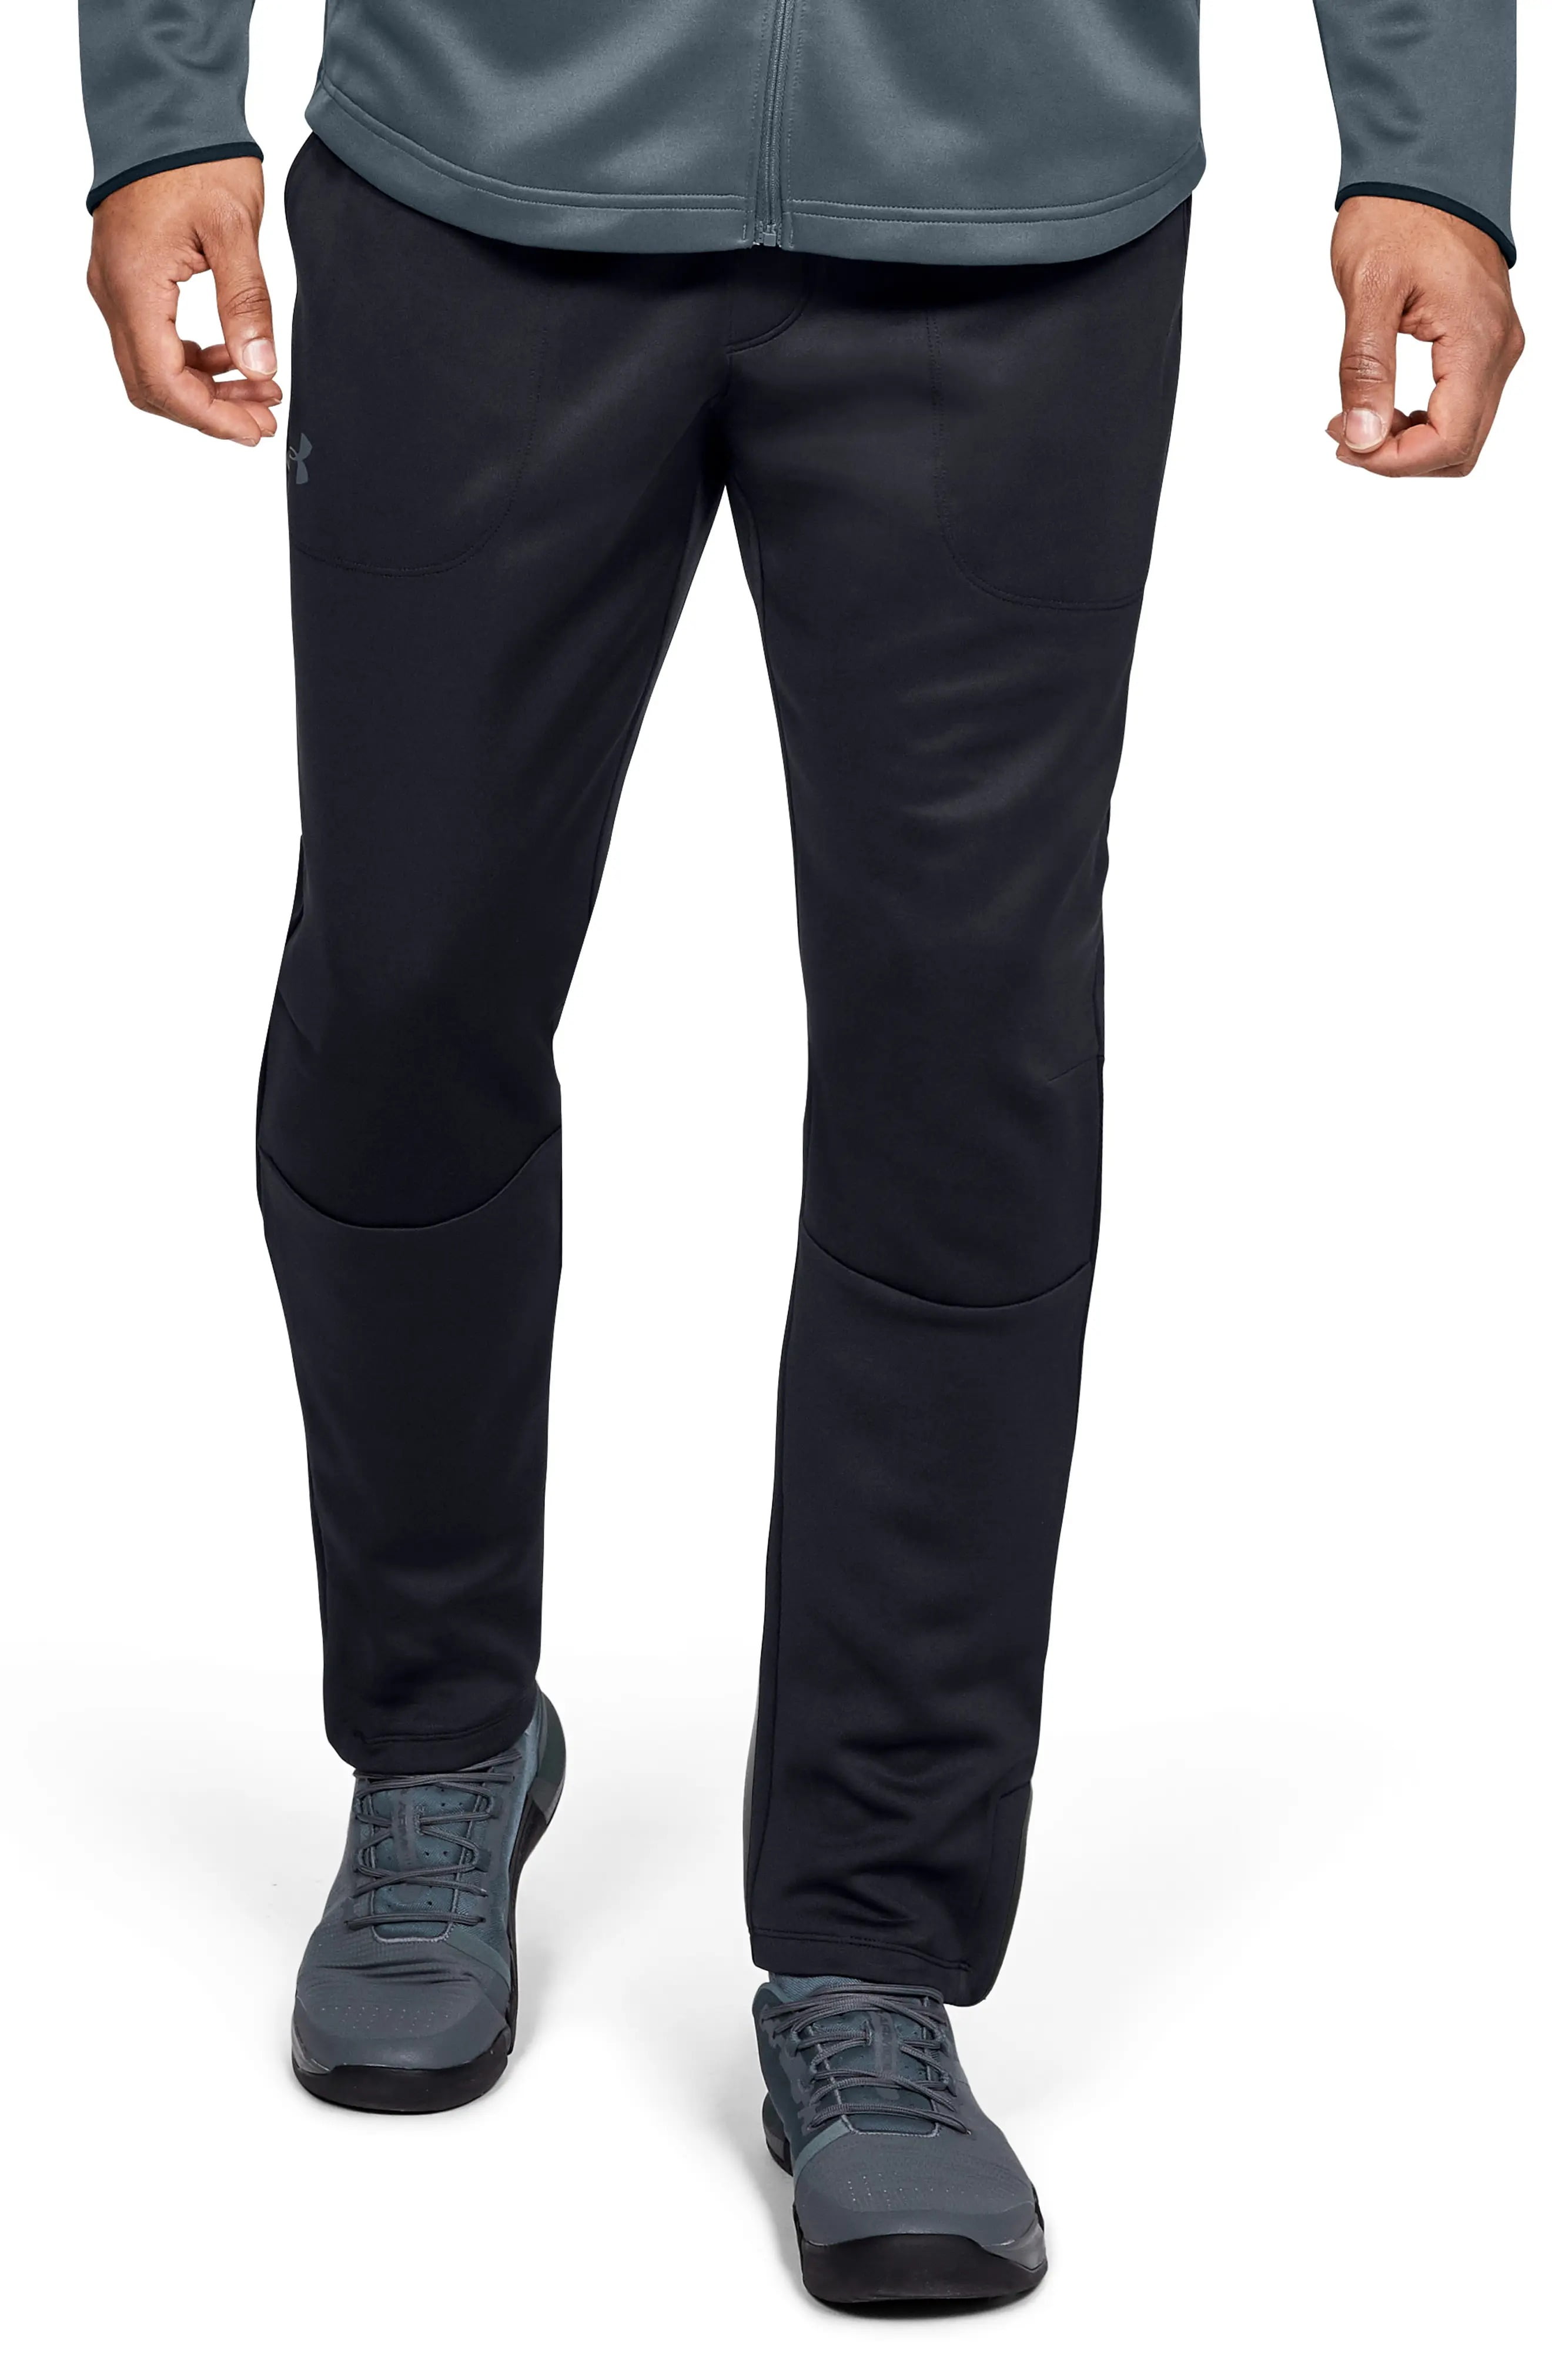 Under Armour Mens Activewear Ankle Zip MK-1 Warm-Up Pants